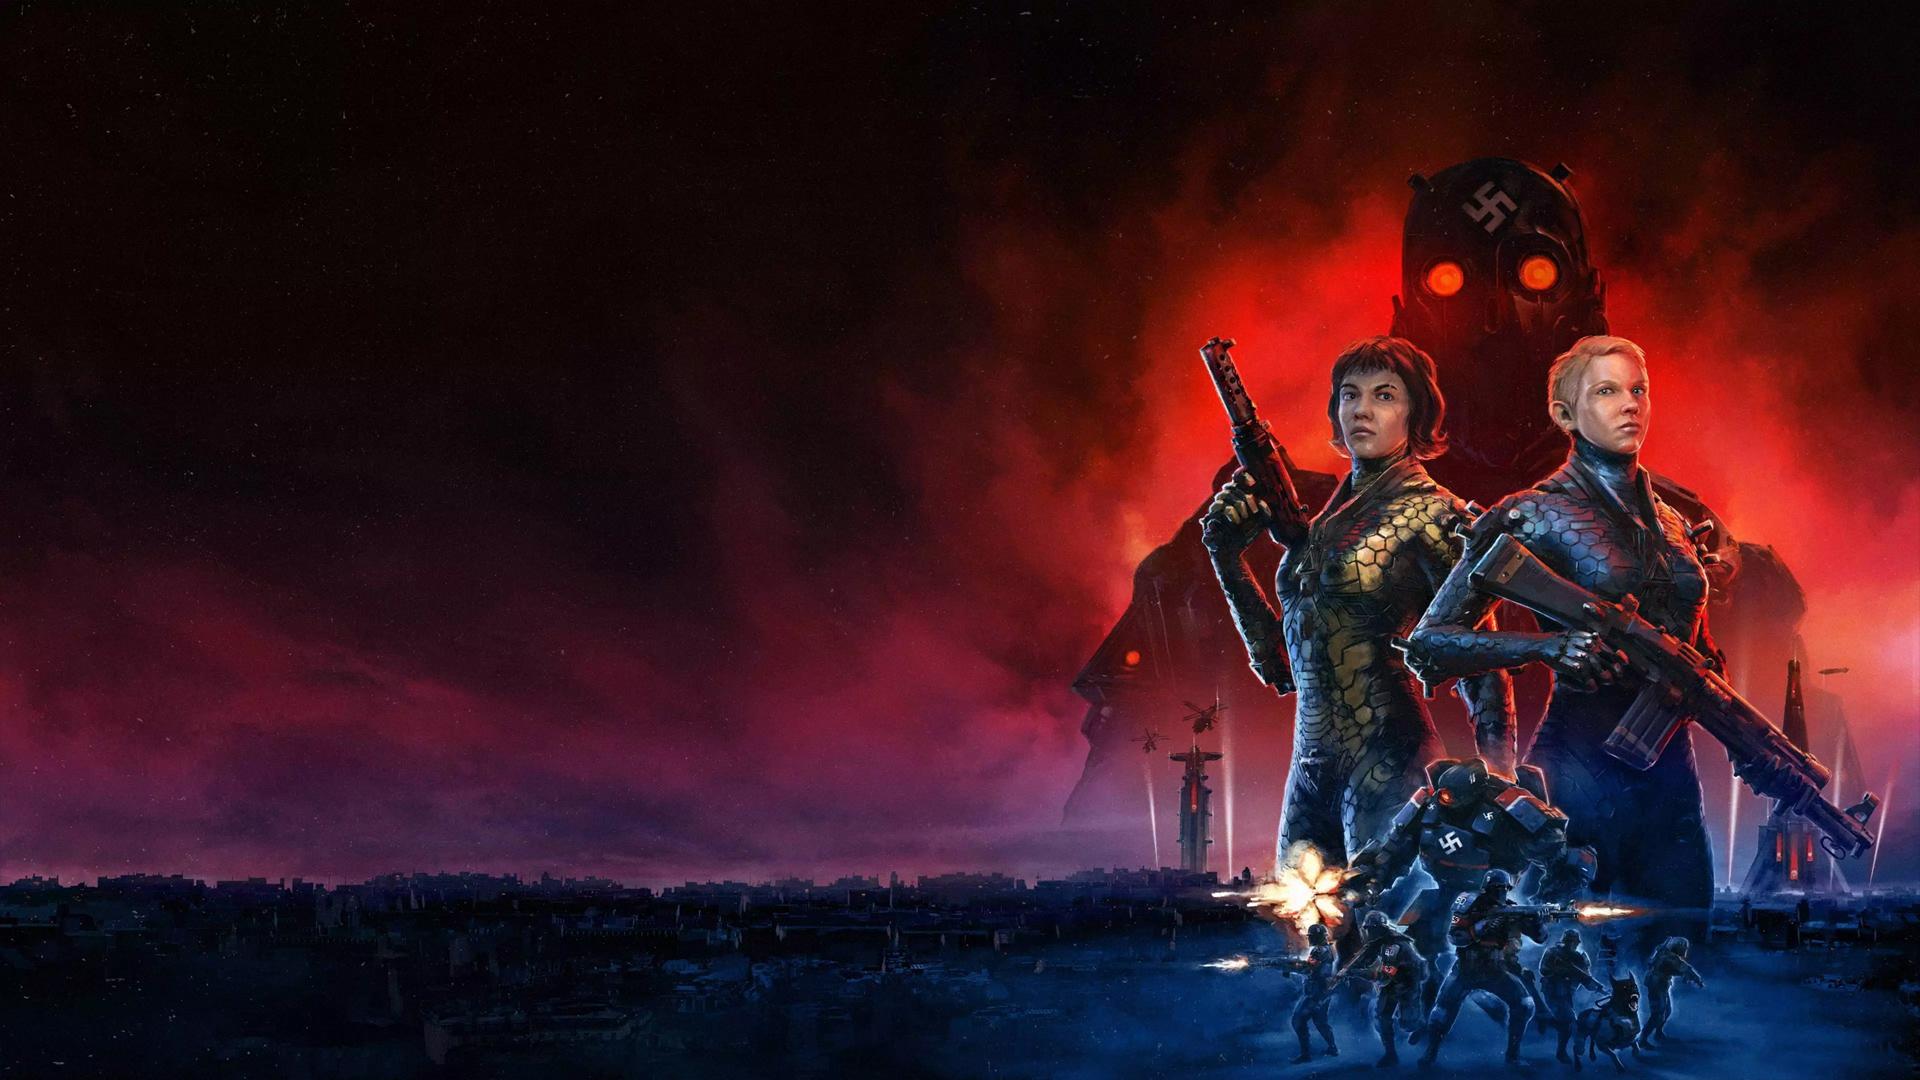 New generation. Wallpaper from Wolfenstein: Youngblood